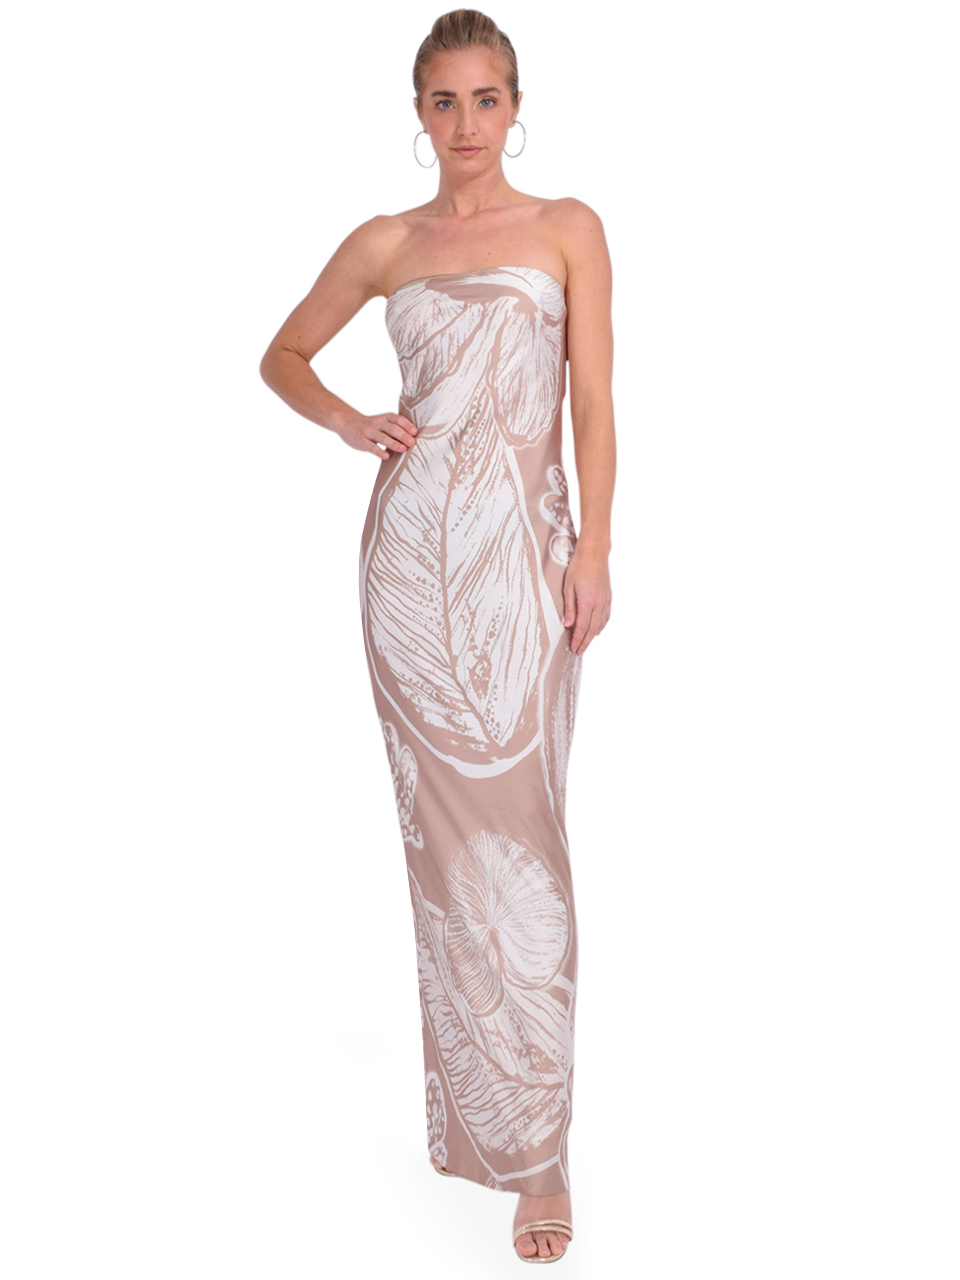 ROCOCO SAND Ines Strapless Maxi Dress in Tan/White Front View 2